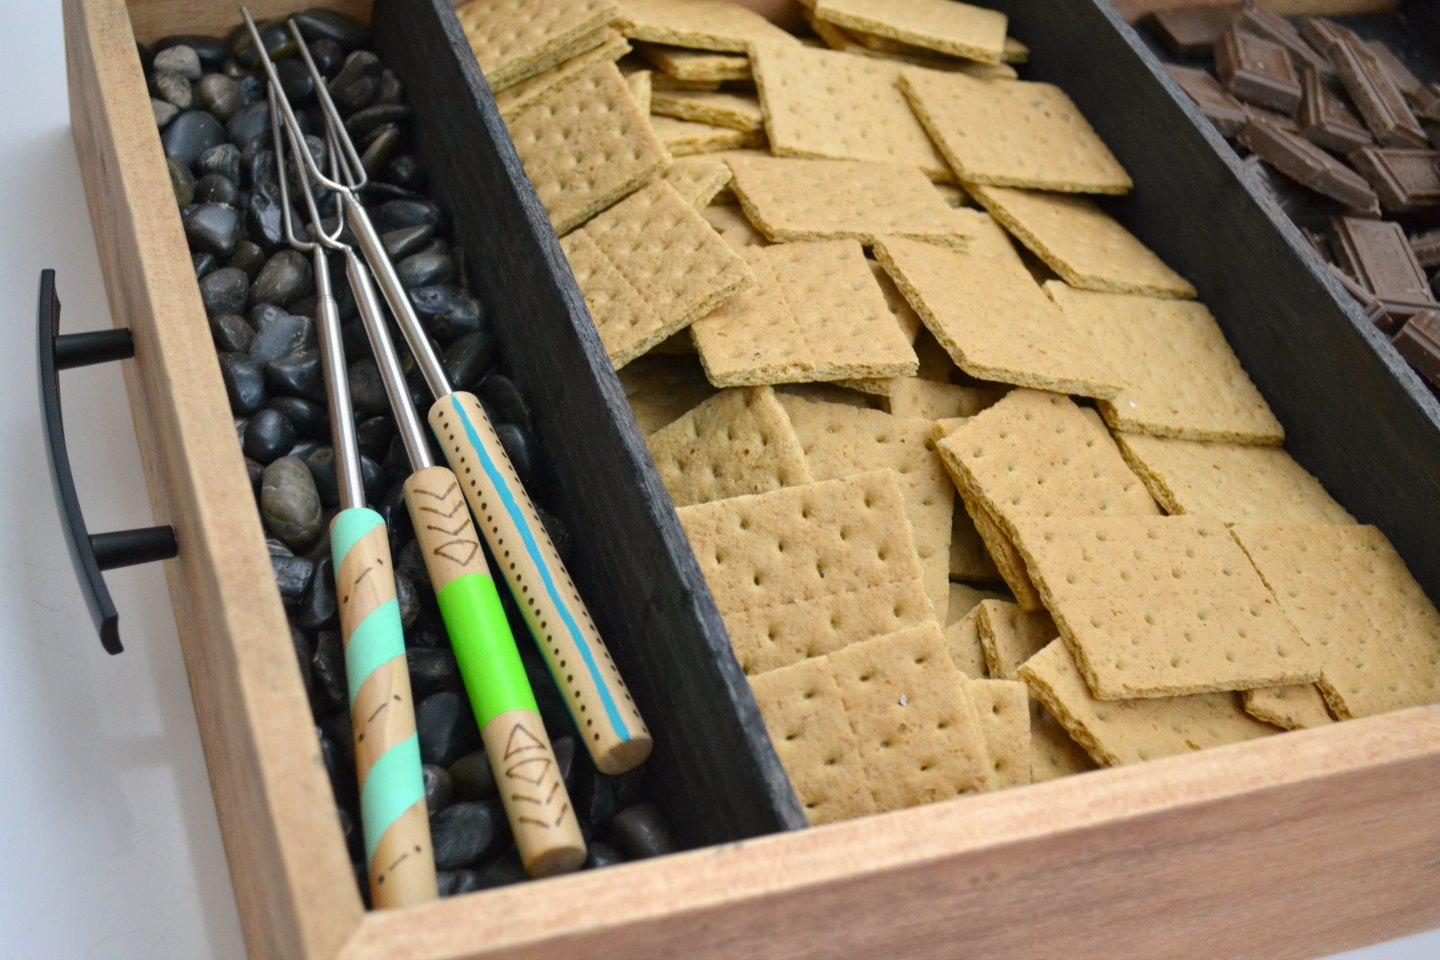 after - more personalized roasting sticks for marshmallows and smores